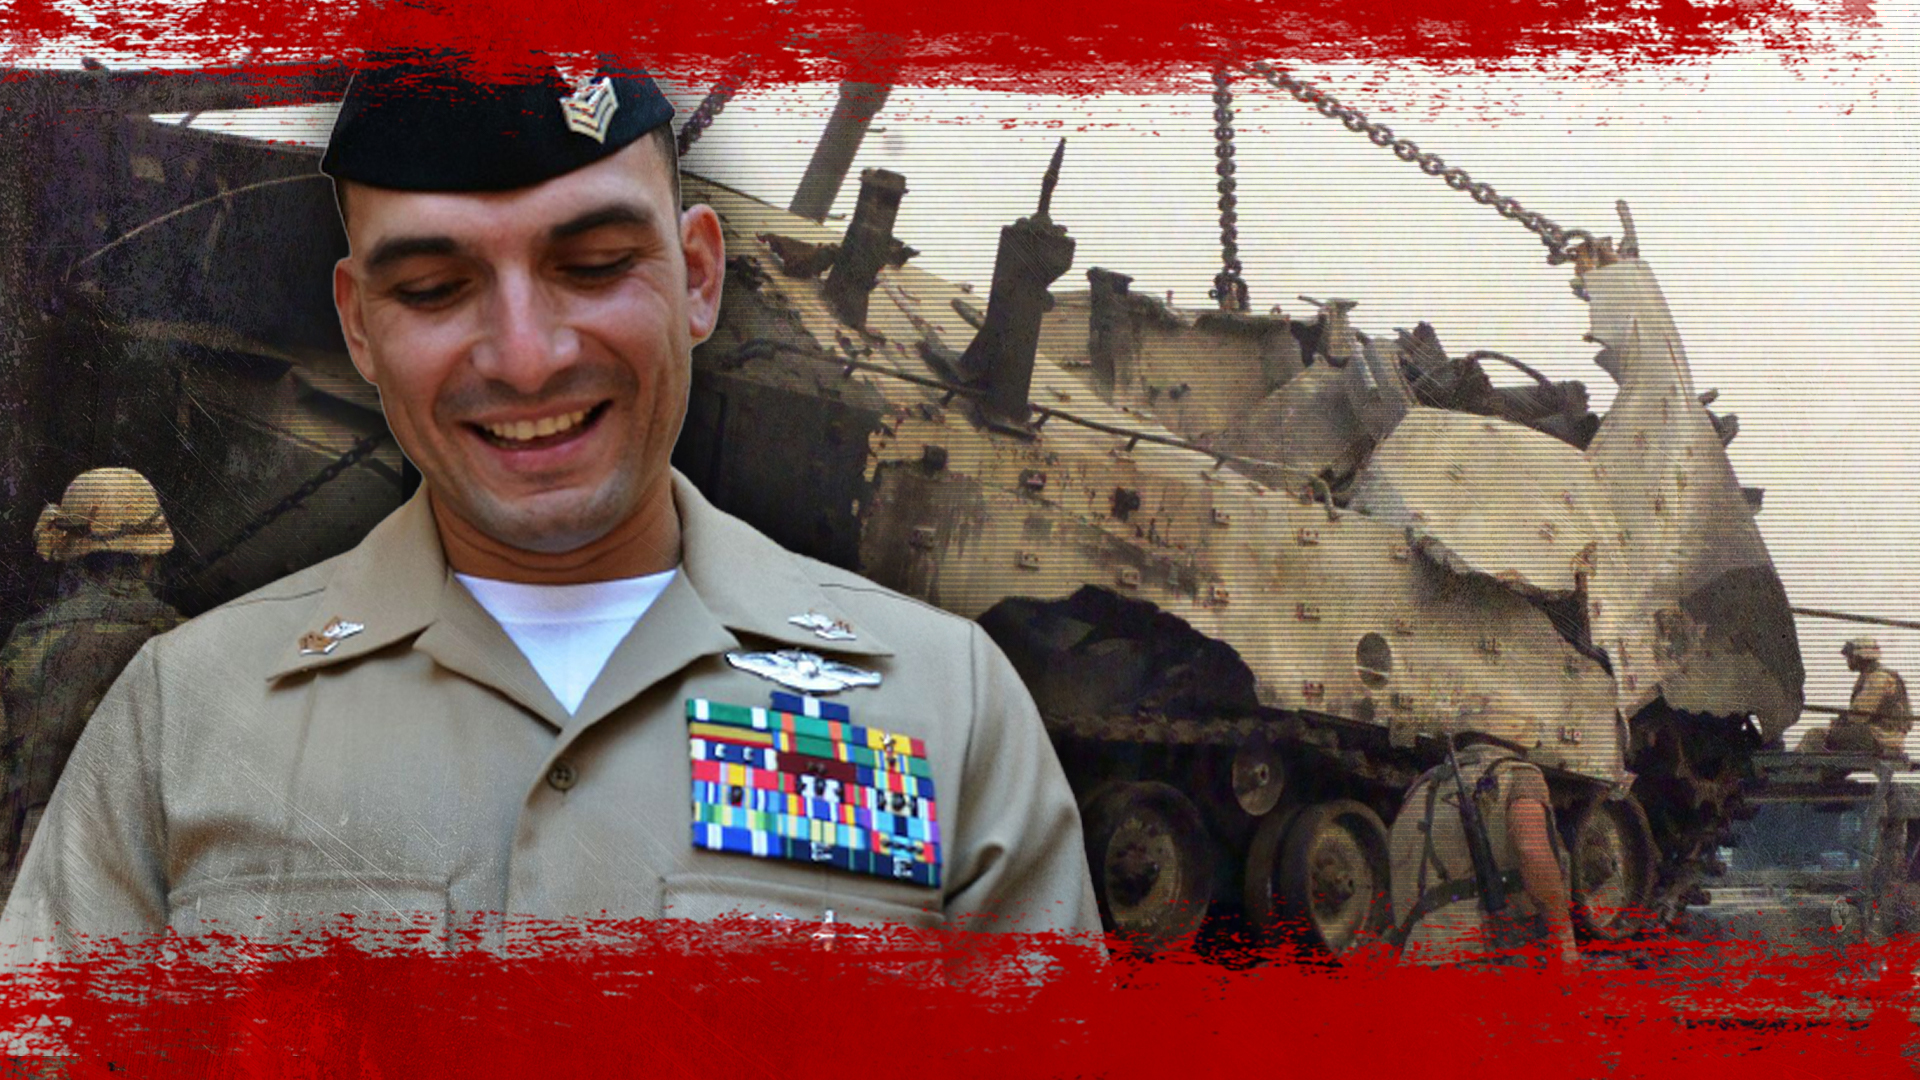 He ran through fire to save 5 Marines and retired as the Navy’s most decorated Corpsman